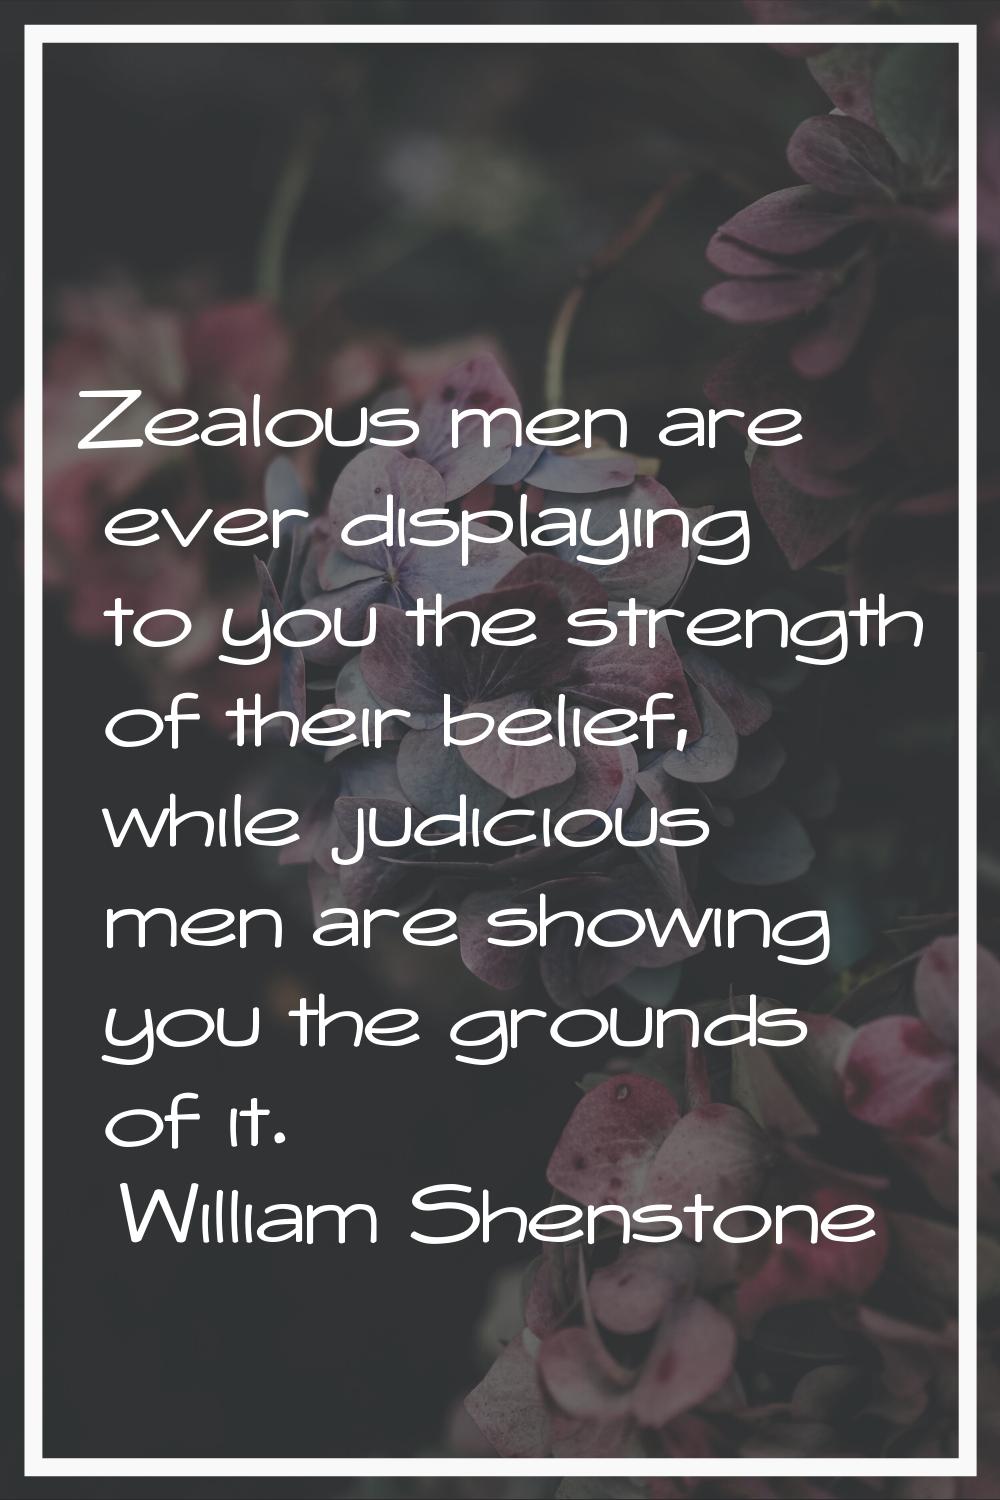 Zealous men are ever displaying to you the strength of their belief, while judicious men are showin